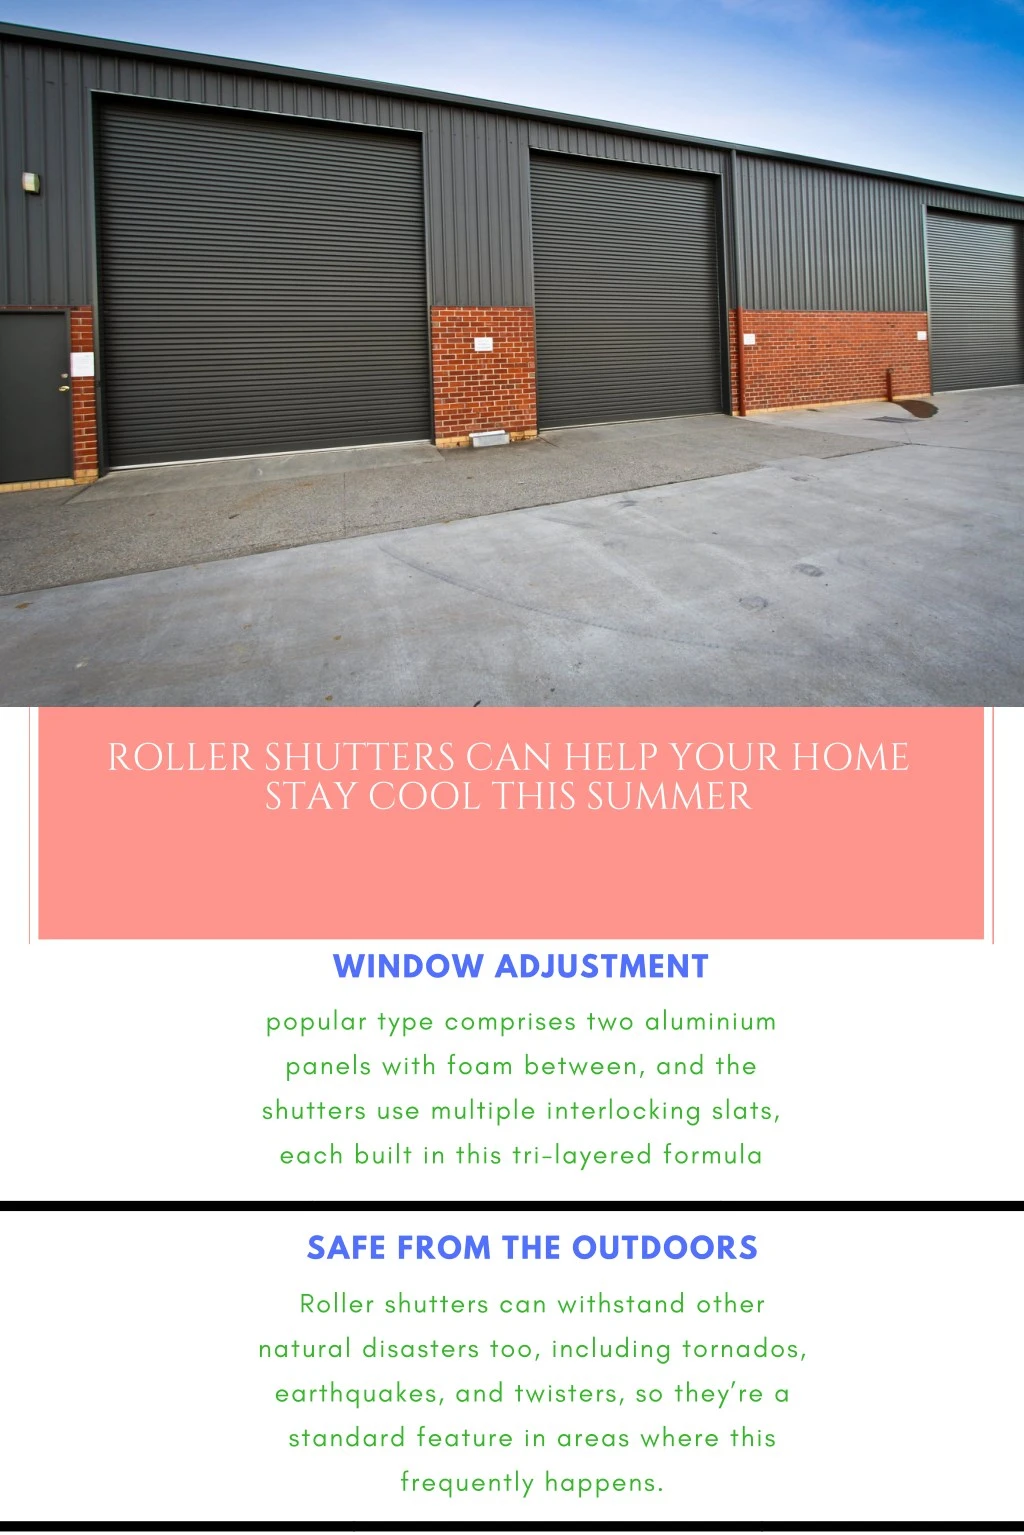 roller shutters can help your home stay cool this